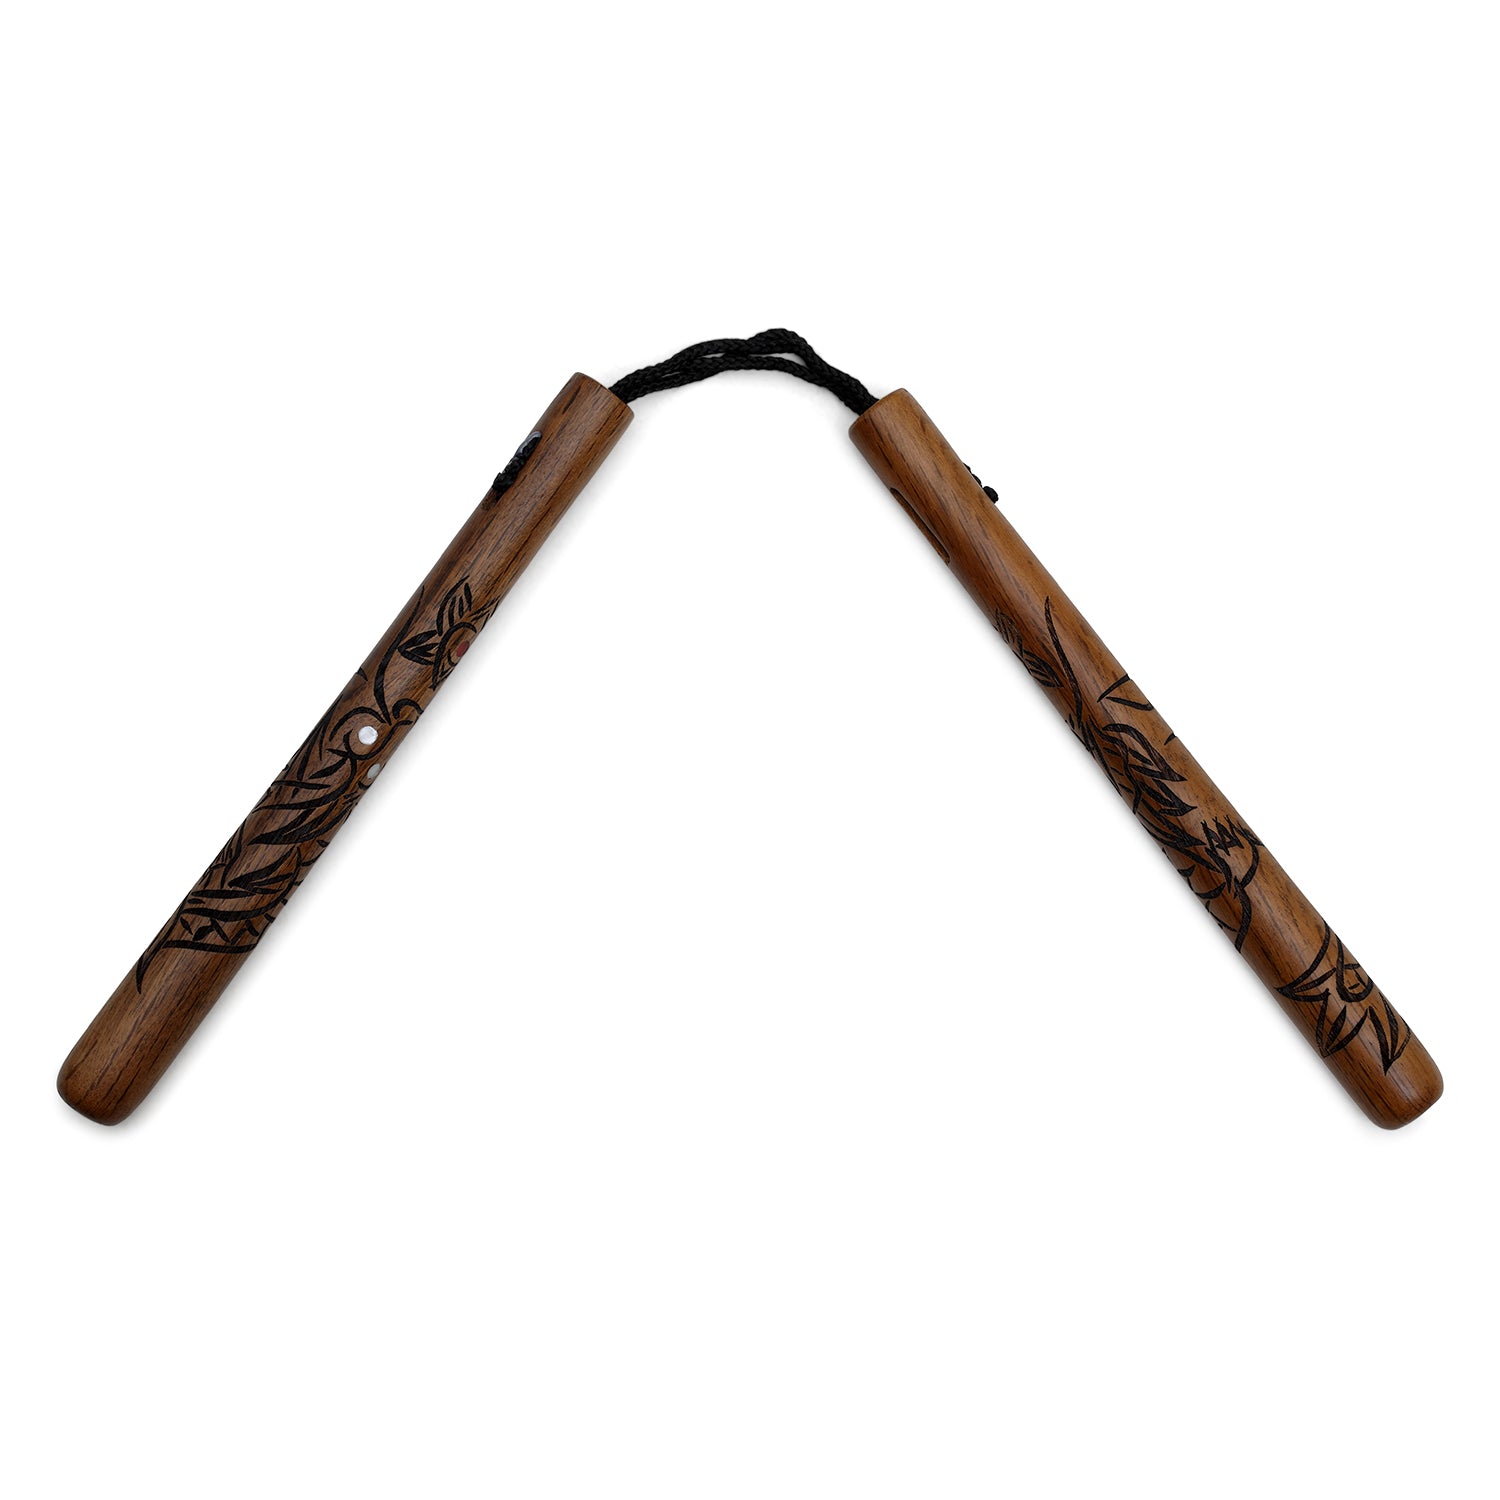 Deluxe Red Oak Carved Dragon Nunchucks Cord